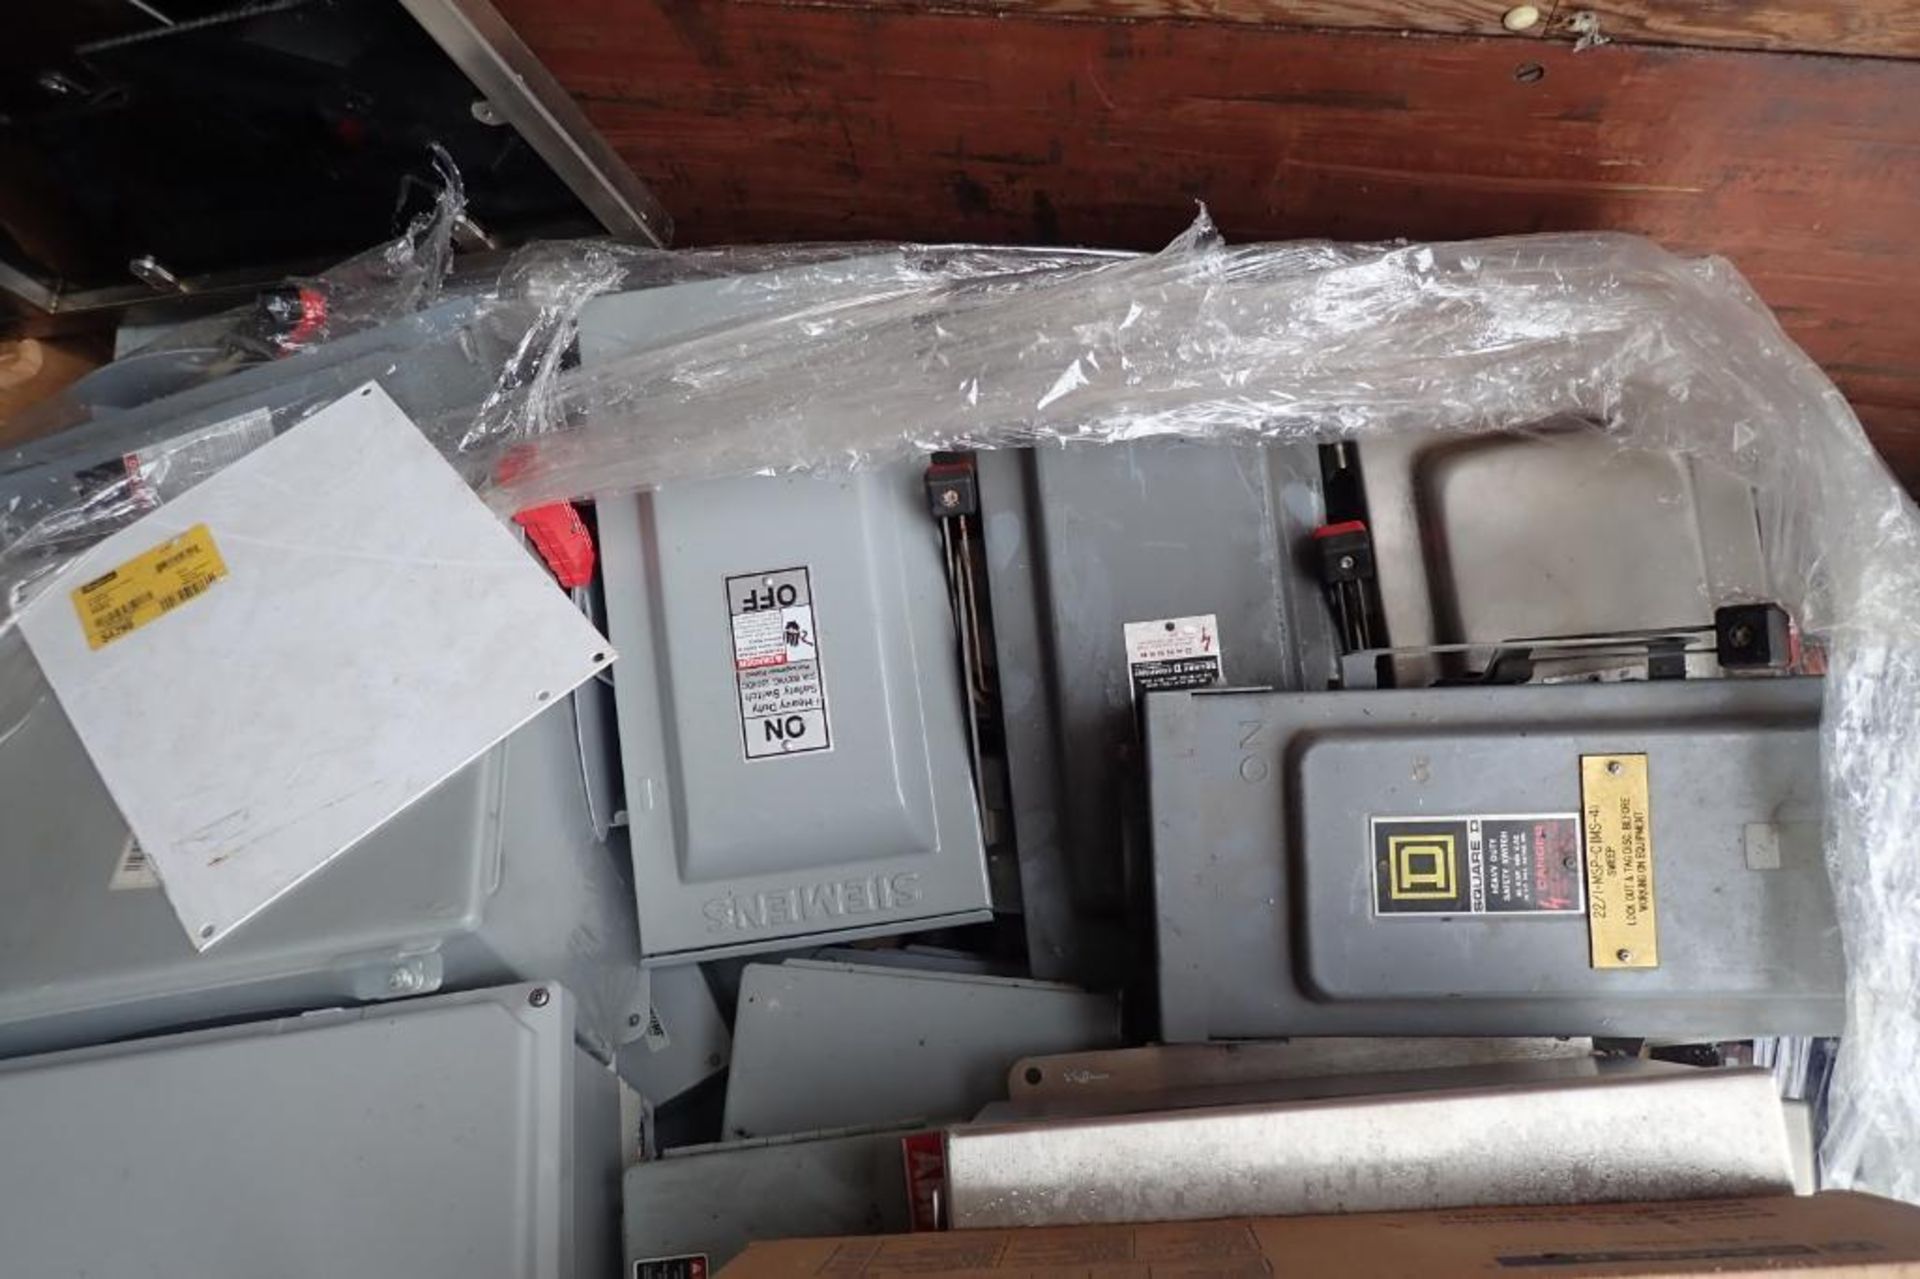 Lot of assorted electric parts, HD switches, control panels. (Located in Kenosha, WI) - Image 3 of 10